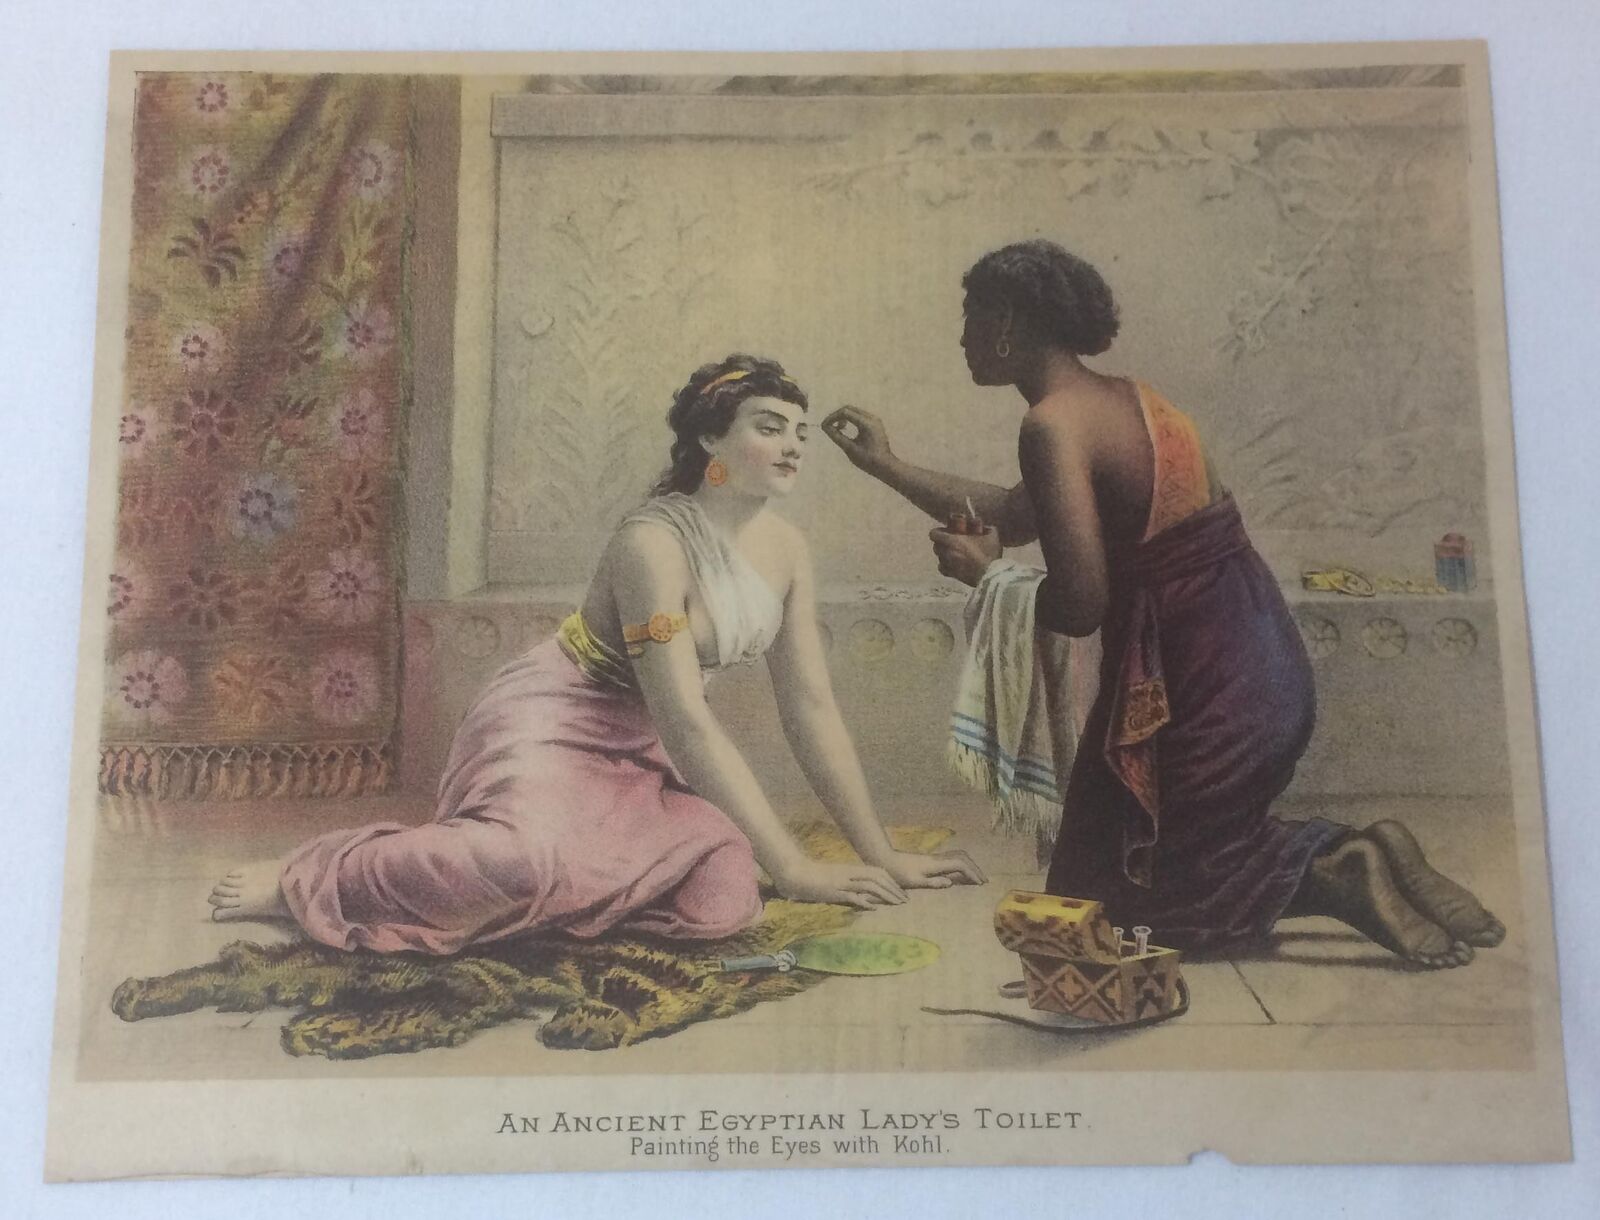 1880 lithograph ~ ANCIENT EGYPTIAN LADY'S TOILET